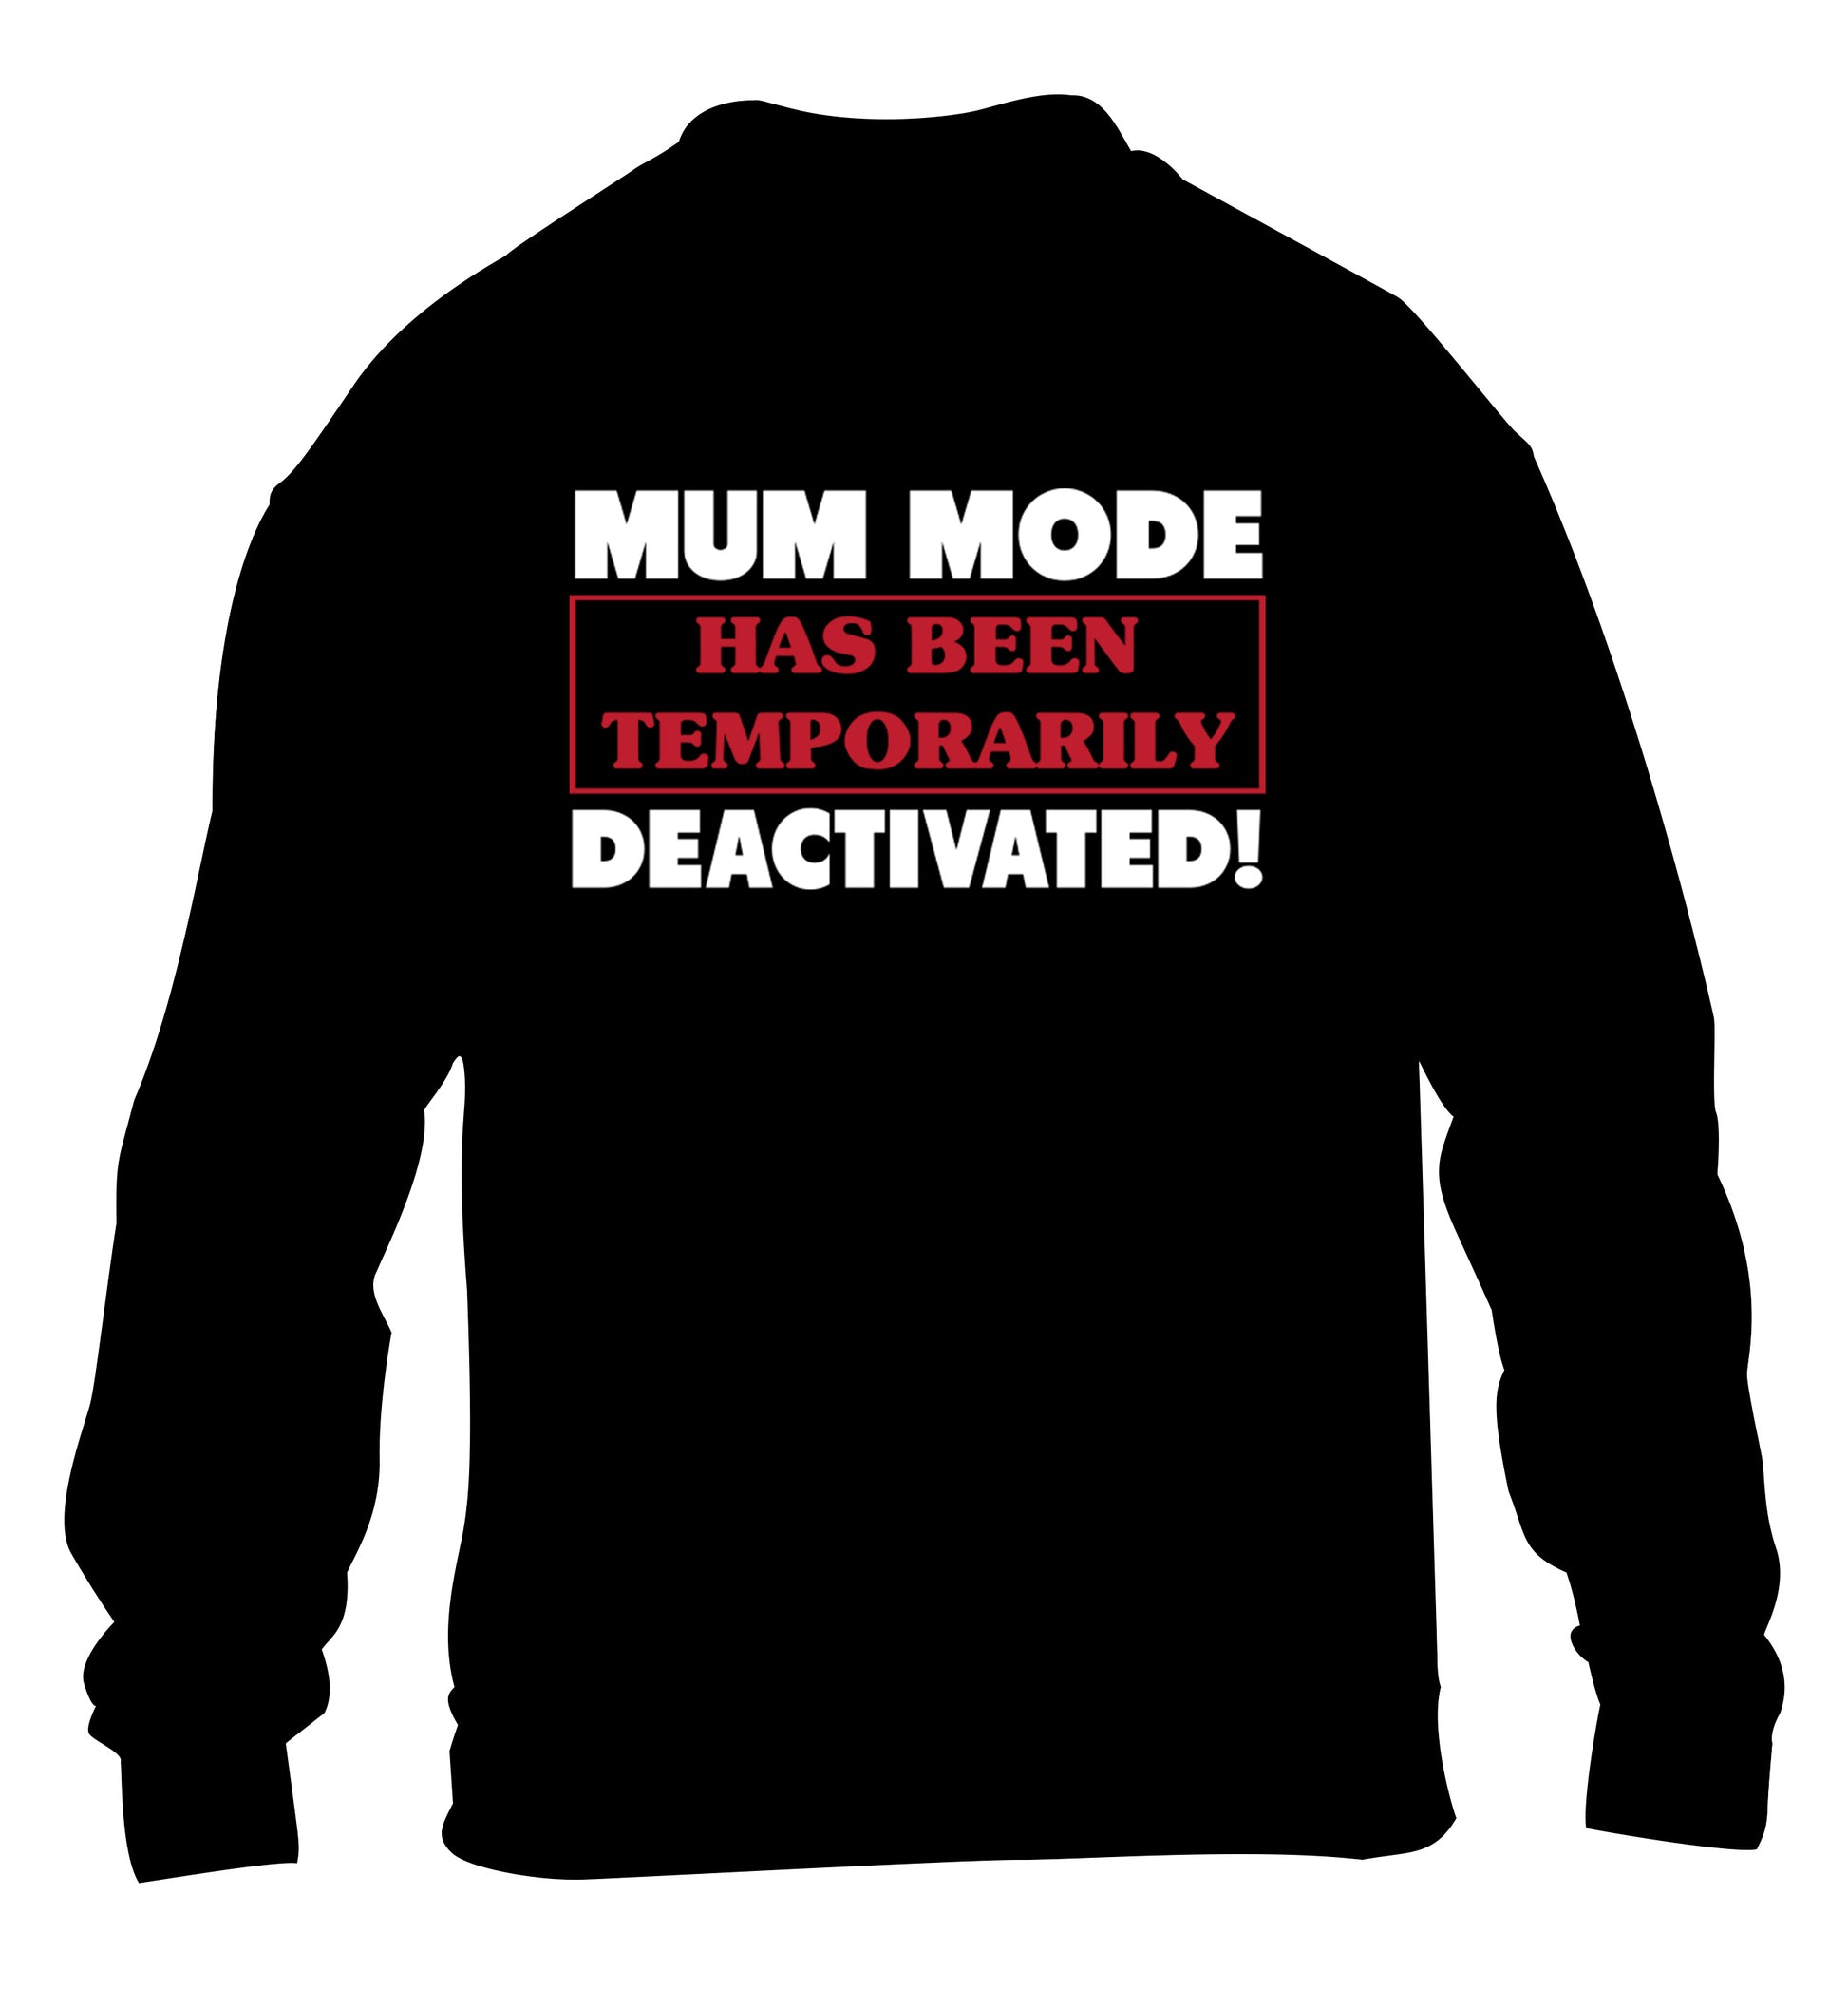 Mum mode has been temporarily deactivated! children's black sweater 12-13 Years